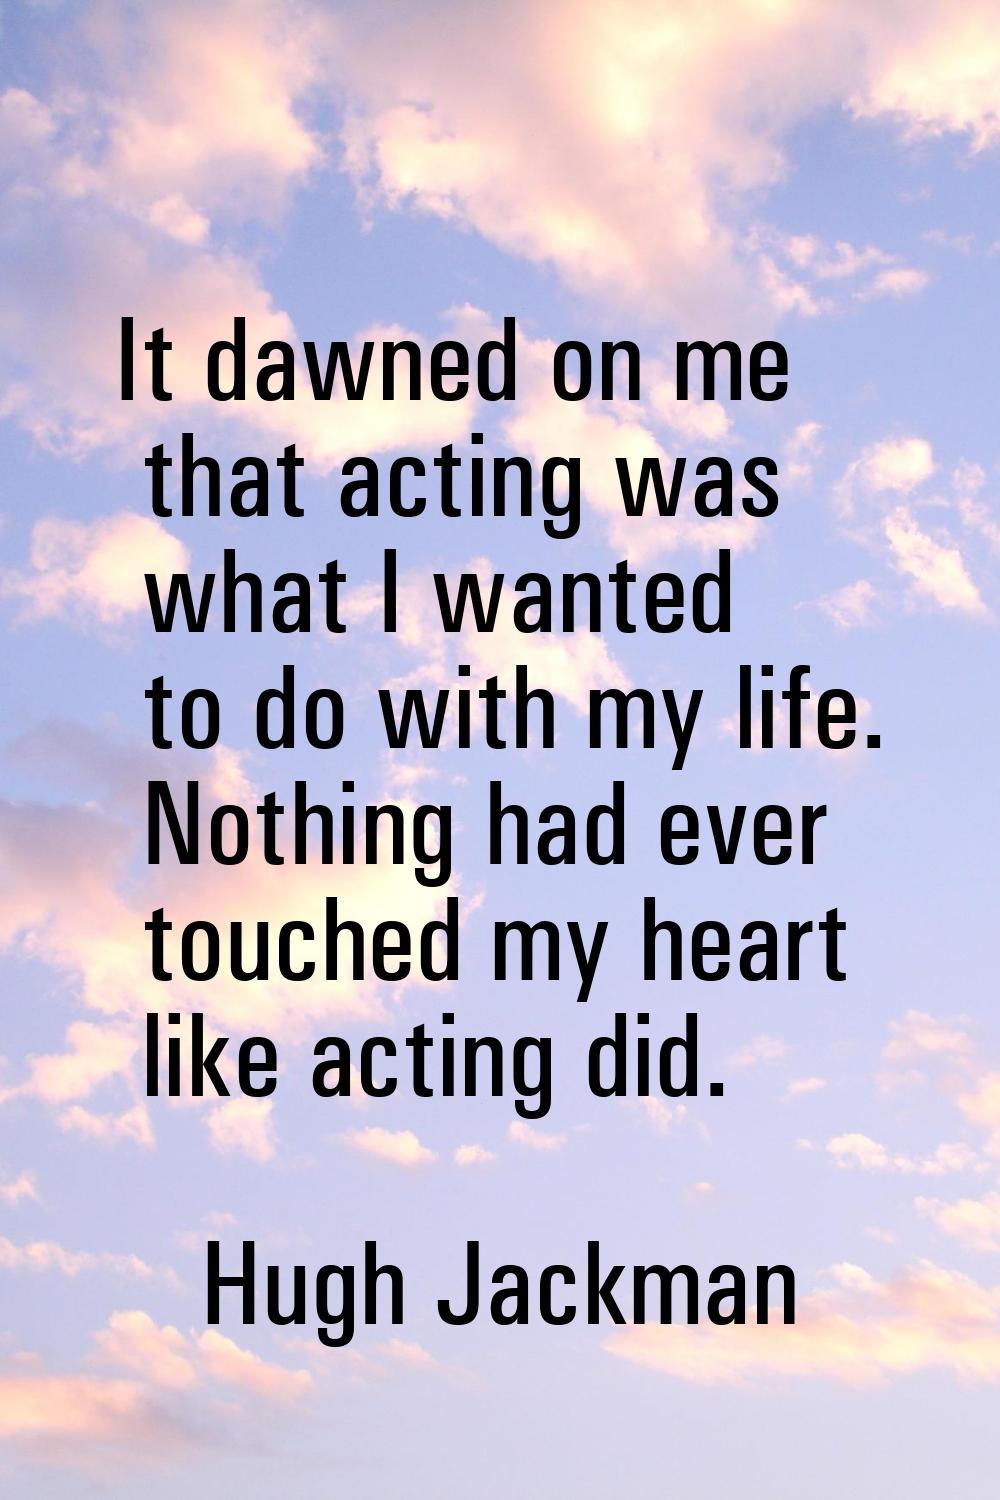 It dawned on me that acting was what I wanted to do with my life. Nothing had ever touched my heart